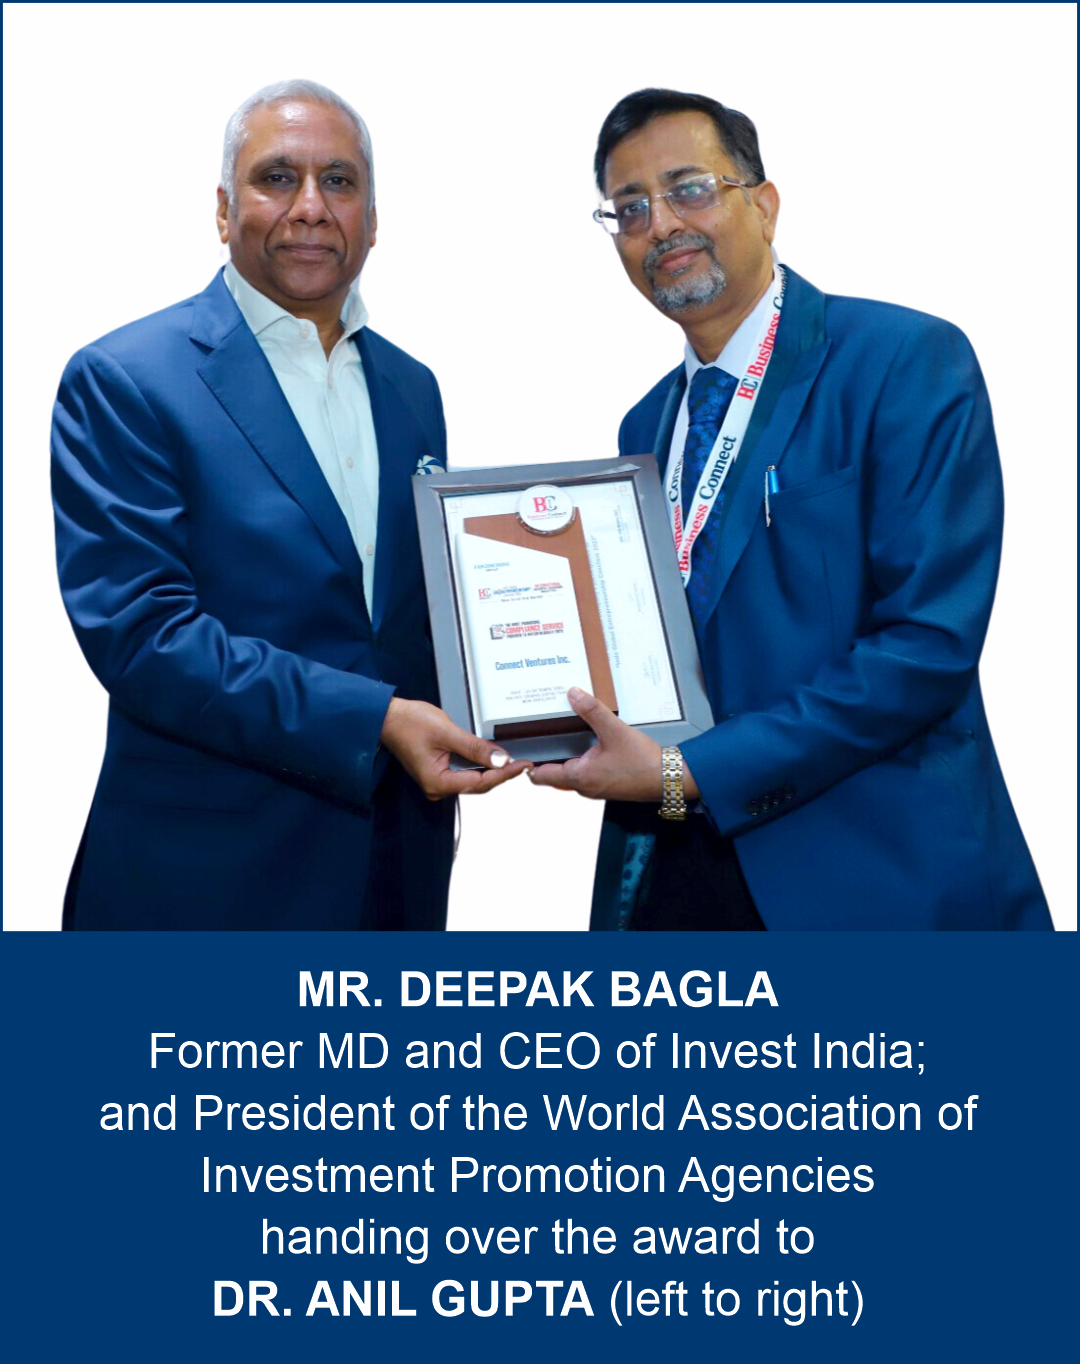 mr-deepak-bagla-former-md-and-ceo-of-invest-india-and-president-of-the-world-association-of-investment-promotion-agencies-handing-over-the-award-to-dr-anil-gupta-(left-to-right)